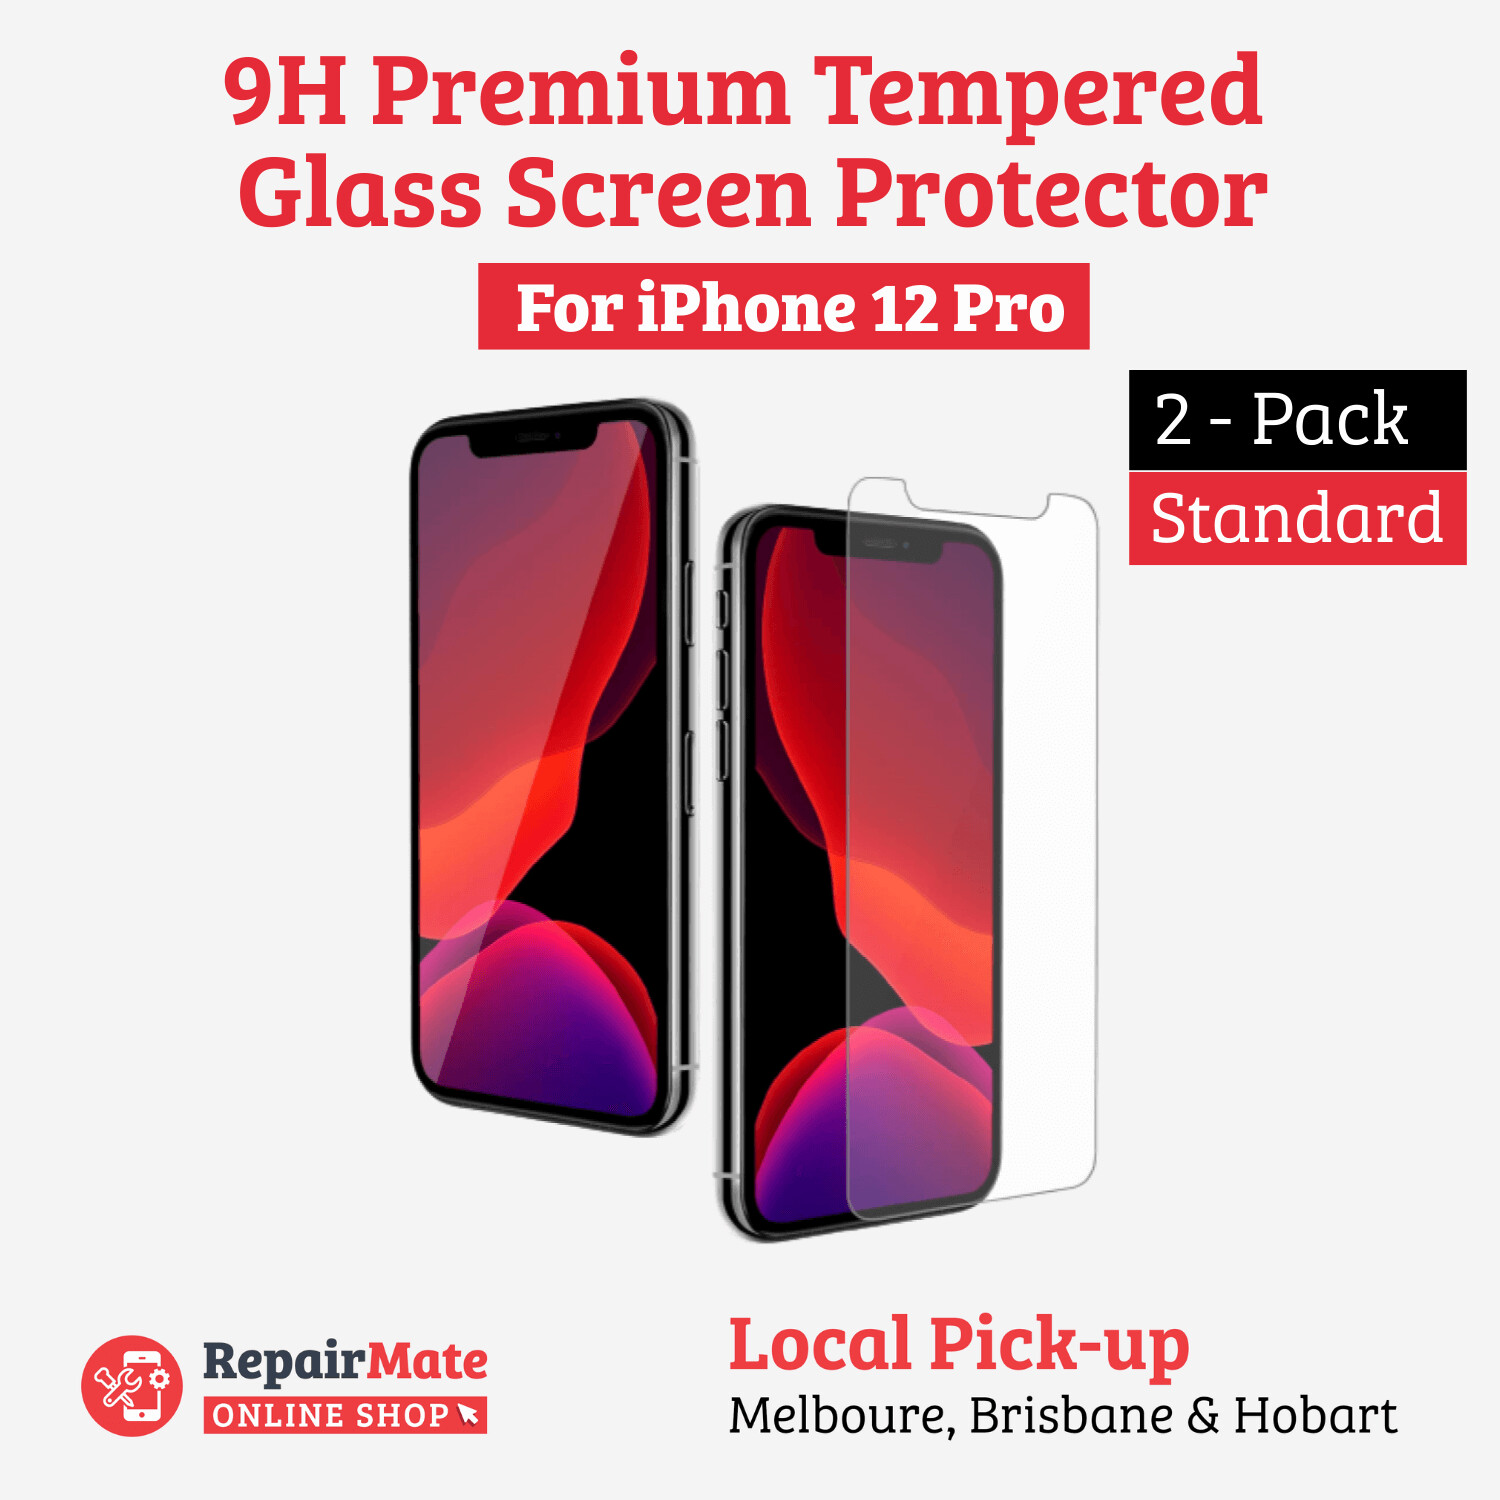 iPhone 12 Pro 9H Premium Tempered Glass Screen Protector [2 Pack]